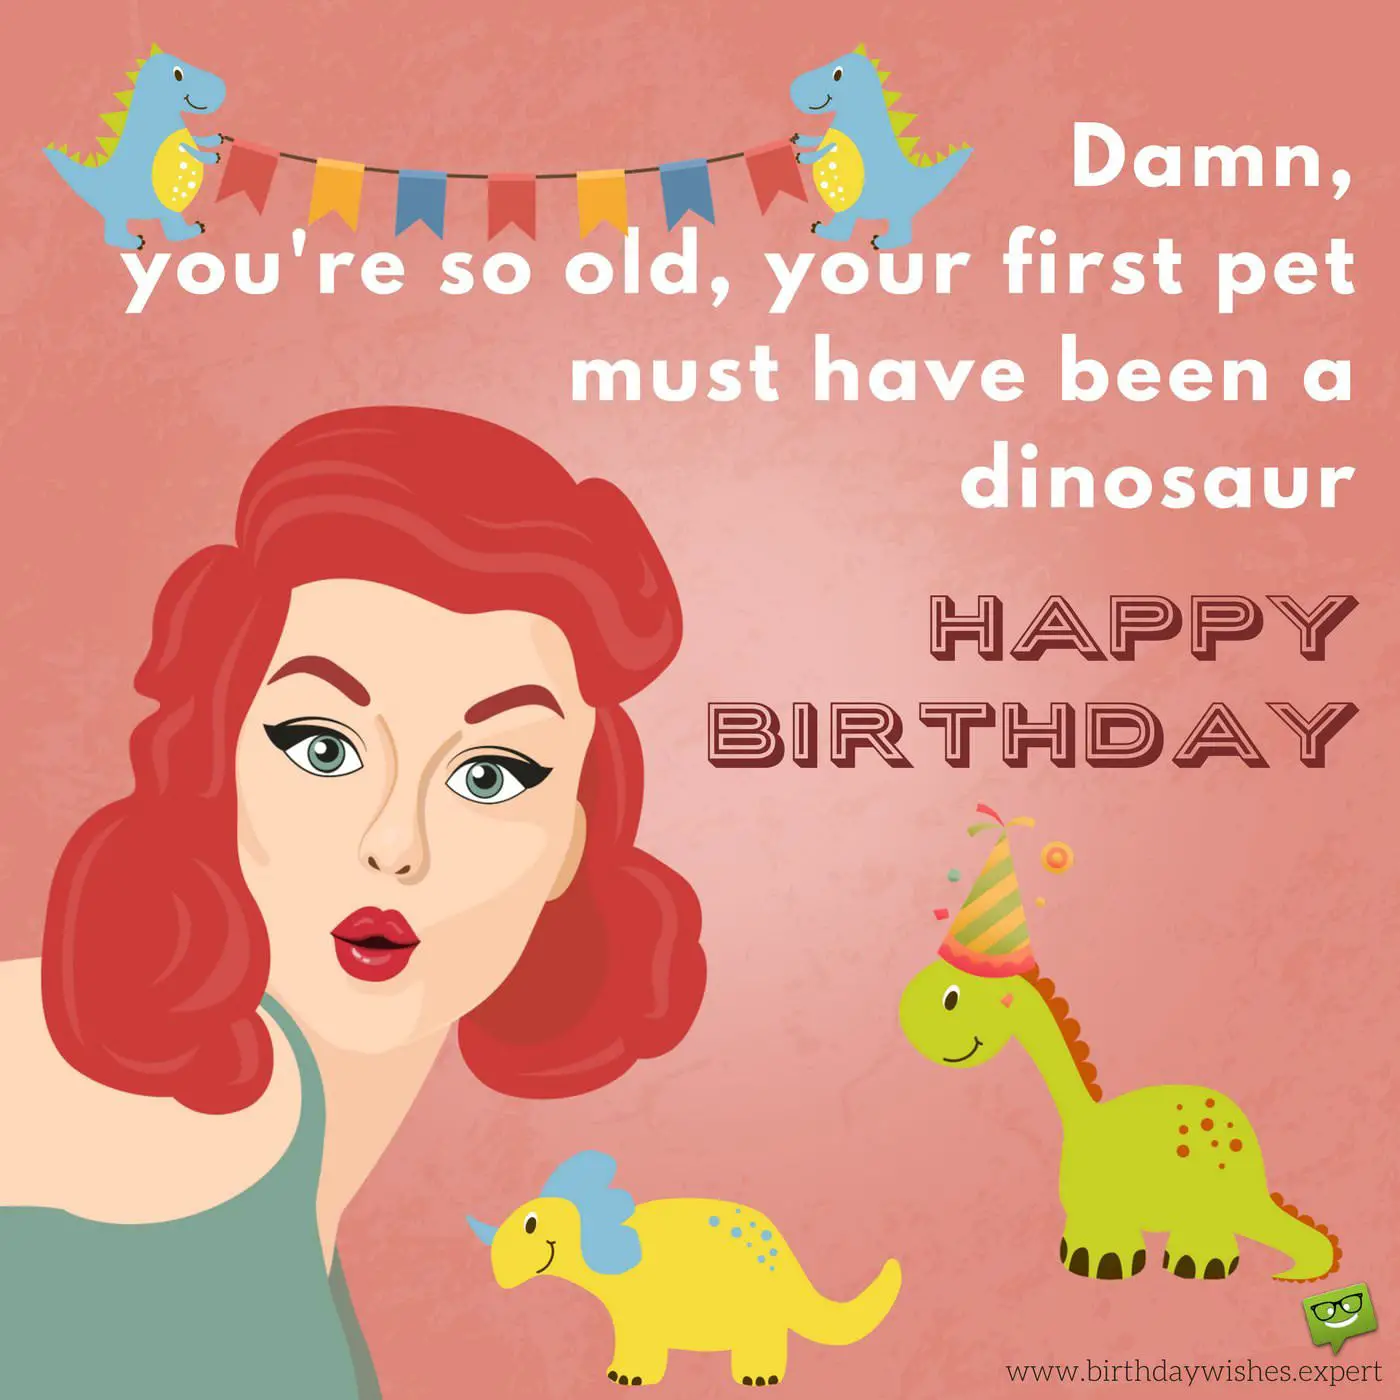 funny quotes about being skinny cracking birthday jokes huge list of funny messages wishes